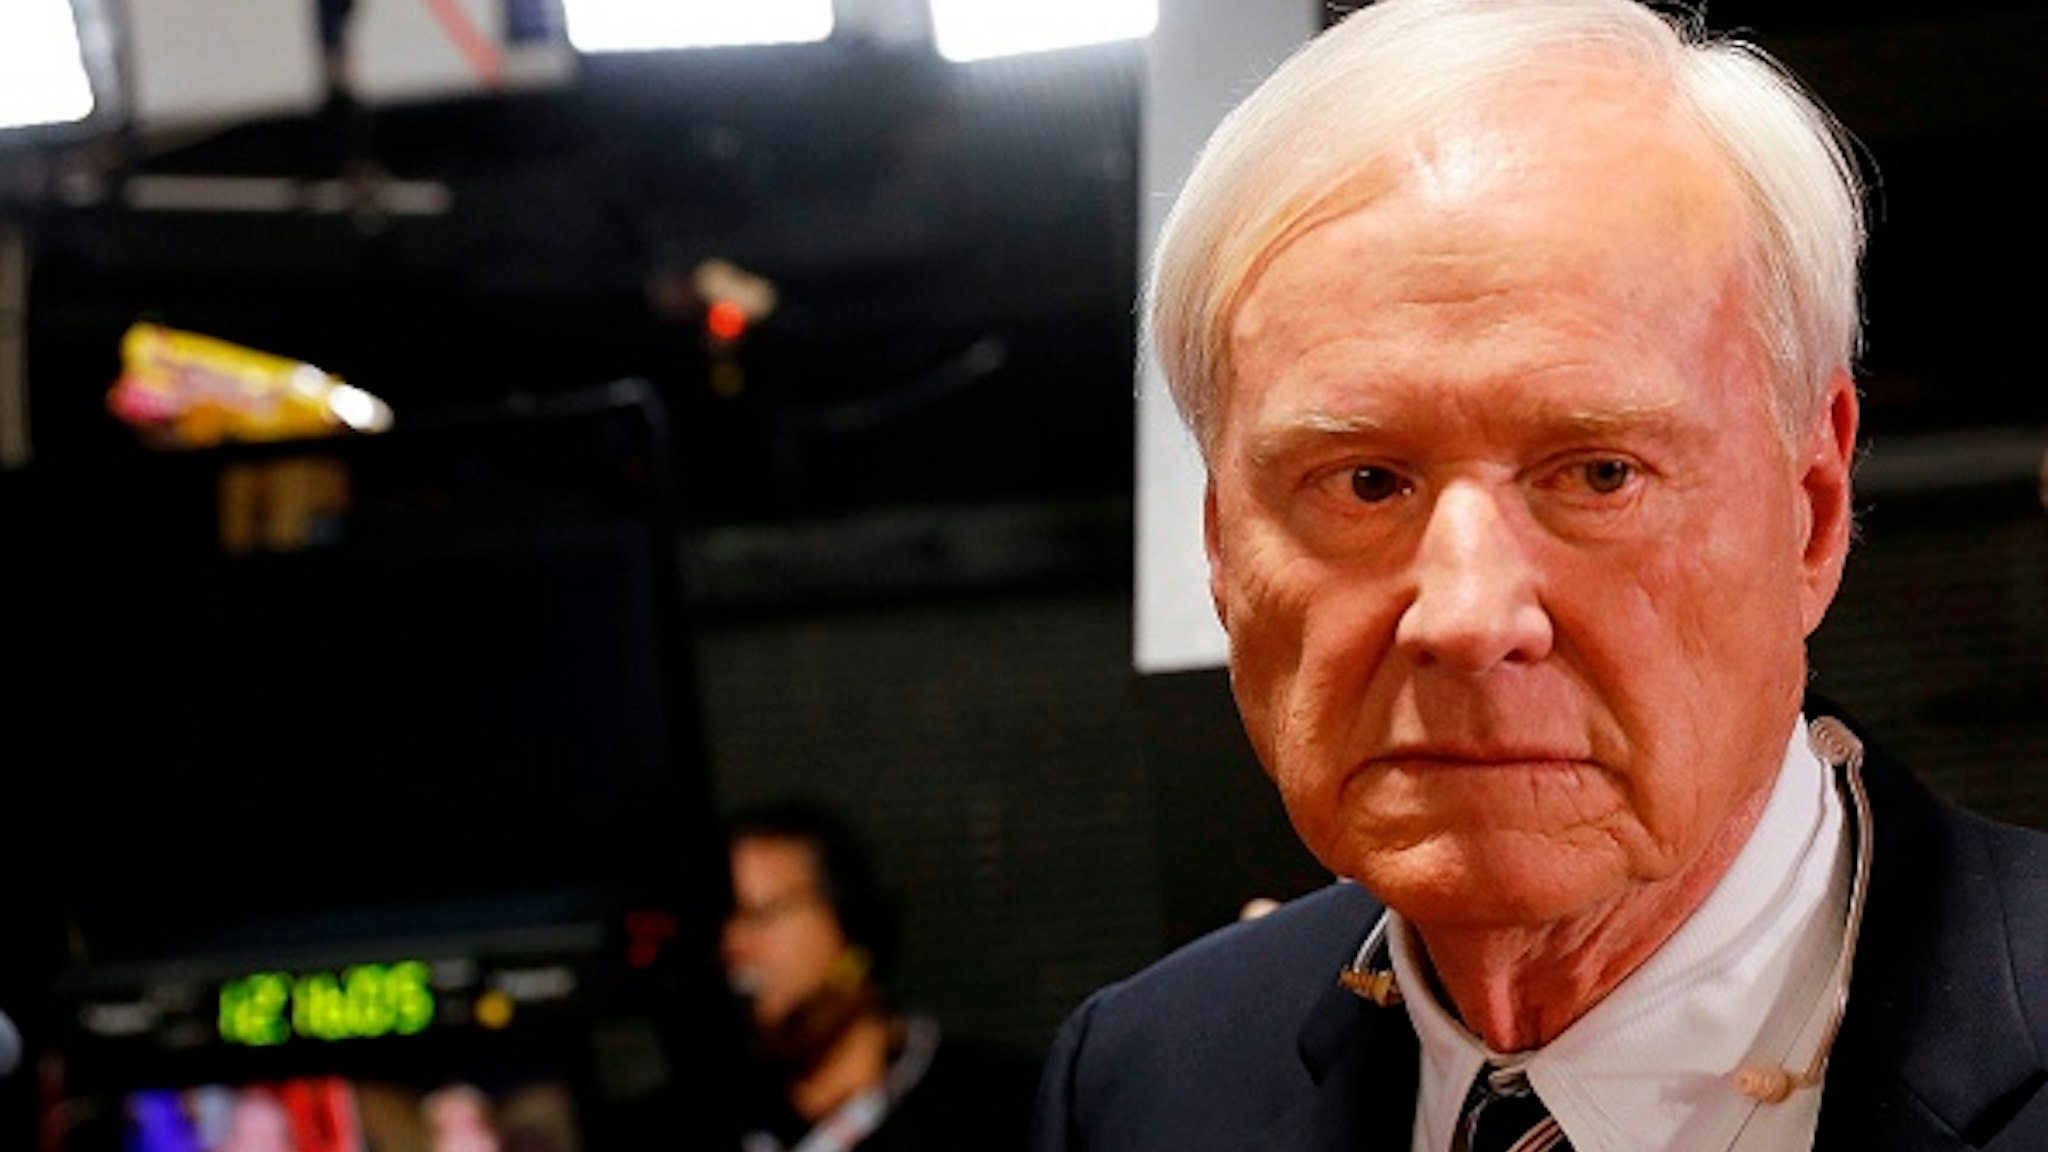 Chris Matthews, host of MSNBC's political show "Hardball" prepares for interviews in the spin room after the Democratic Presidential Debate at the Fox Theatre on July 31, 2019 in Detroit, Michigan. - Chris Matthews anounced his retirement on the air during his last "Hardball" political show on March 2, 2020.